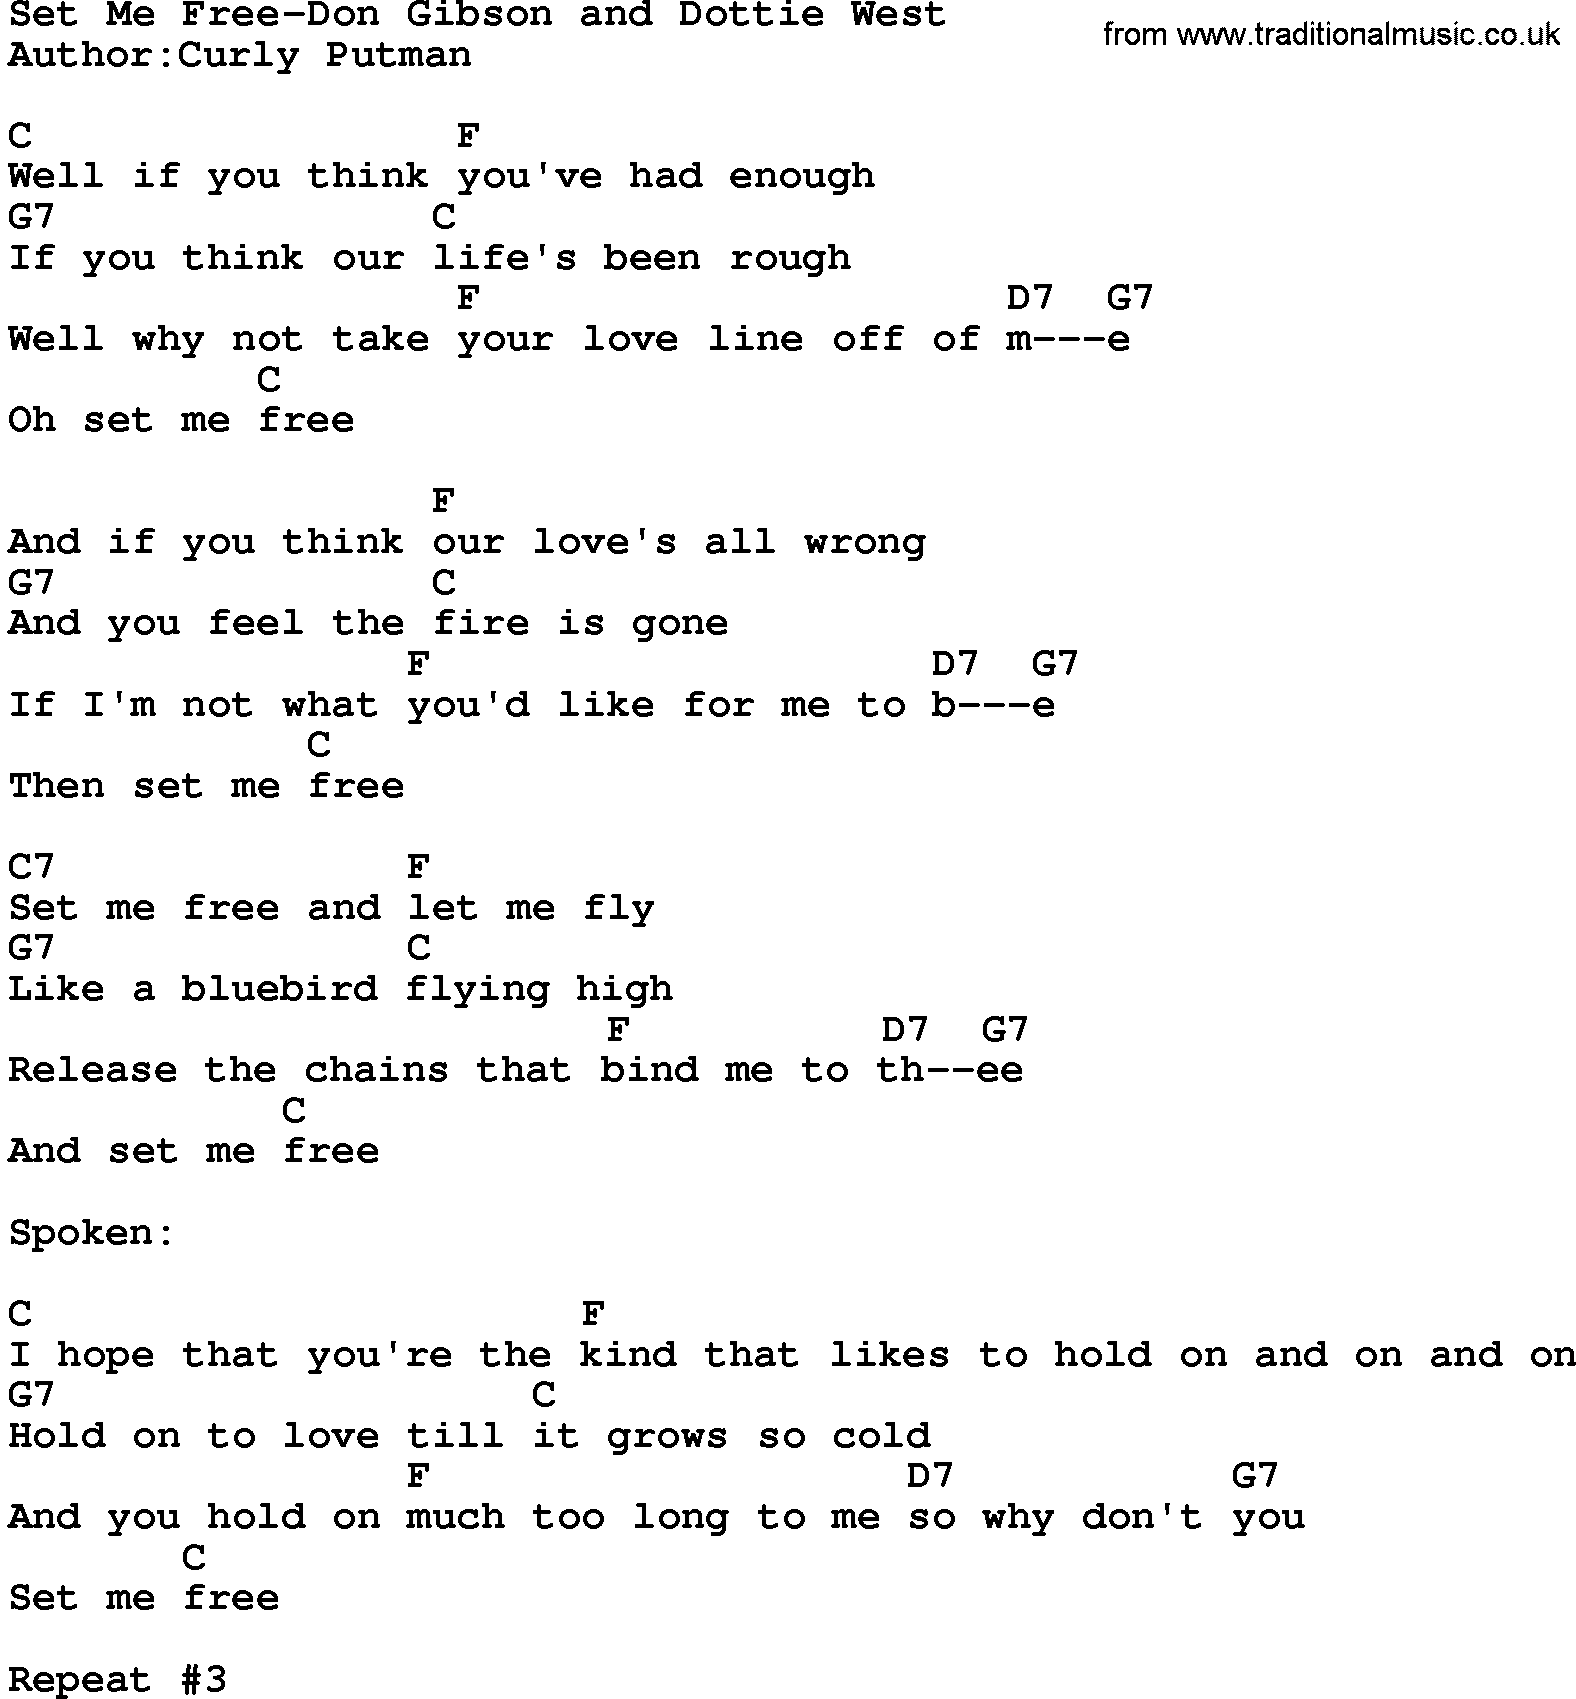 Country music song: Set Me Free-Don Gibson And Dottie West lyrics and chords